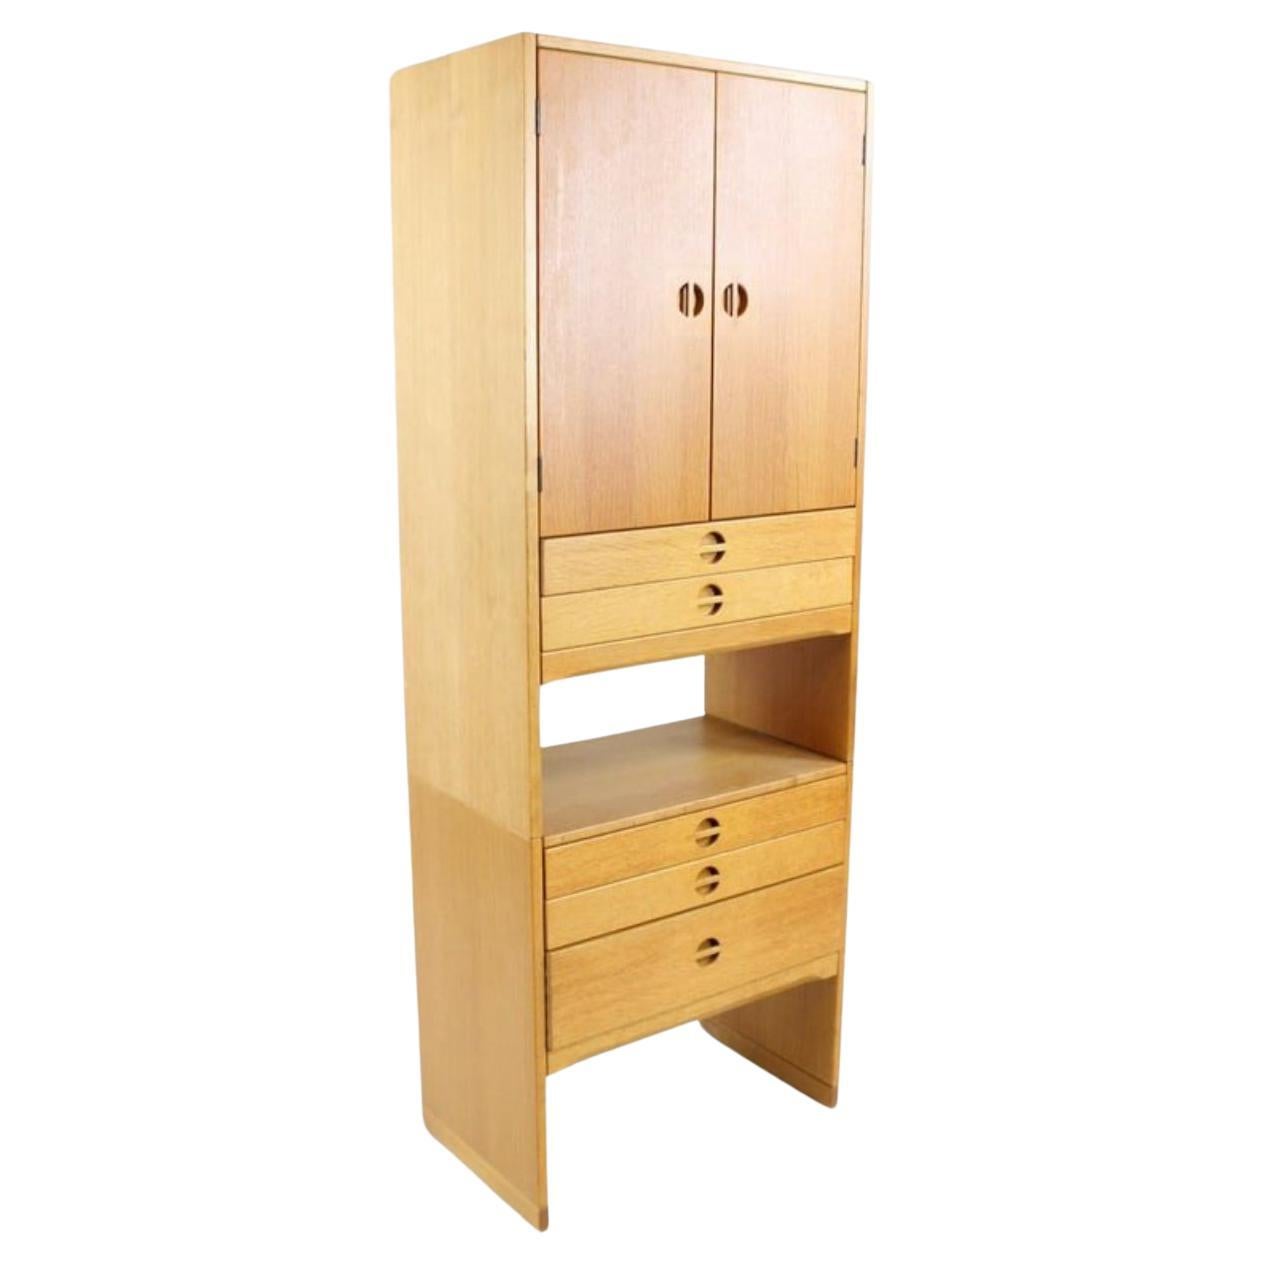 Mid Century Danish Modern Tall Narrow Cabinet by Aksel Kjersgaard Odder. This 2-piece standing storage unit contains 5 slide pull drawers below a 2-door cabinet that opens onto 3 shelves, a storage cubby between the two cabinet pieces. Drawer pulls